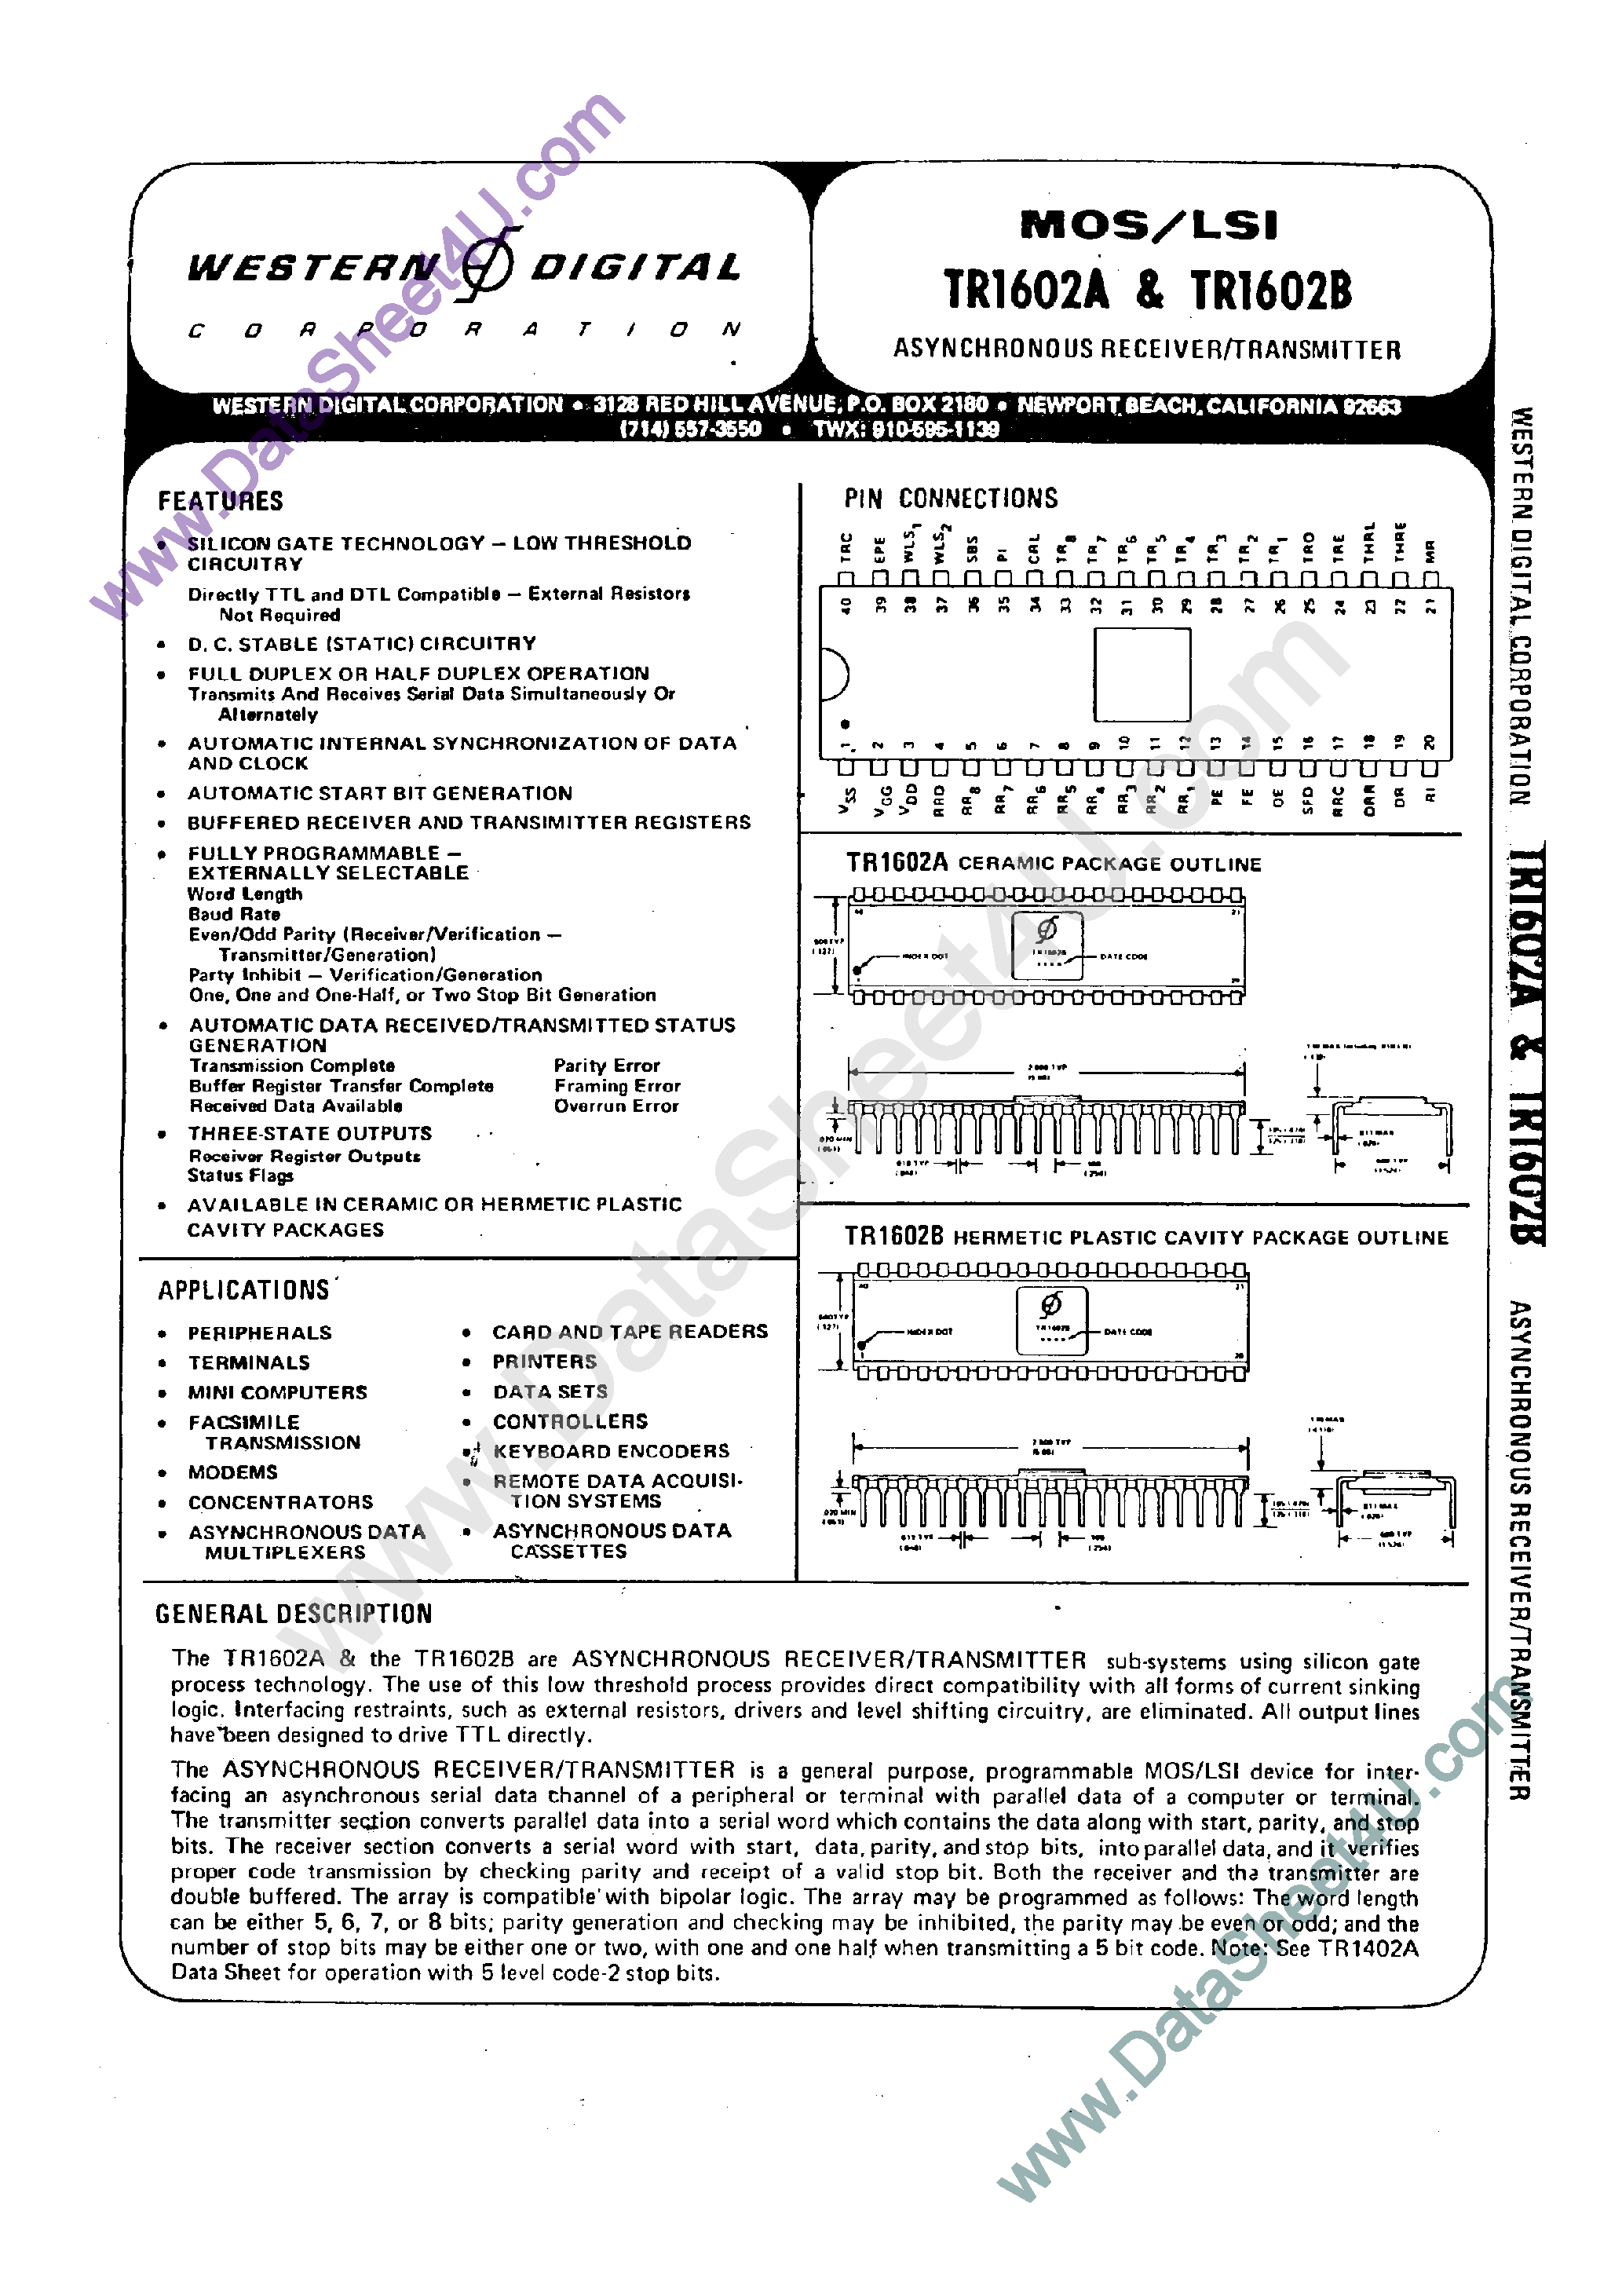 Datasheet TR1602A - (TR1602A/B) Asynchronous Reveiver Transmitter page 1